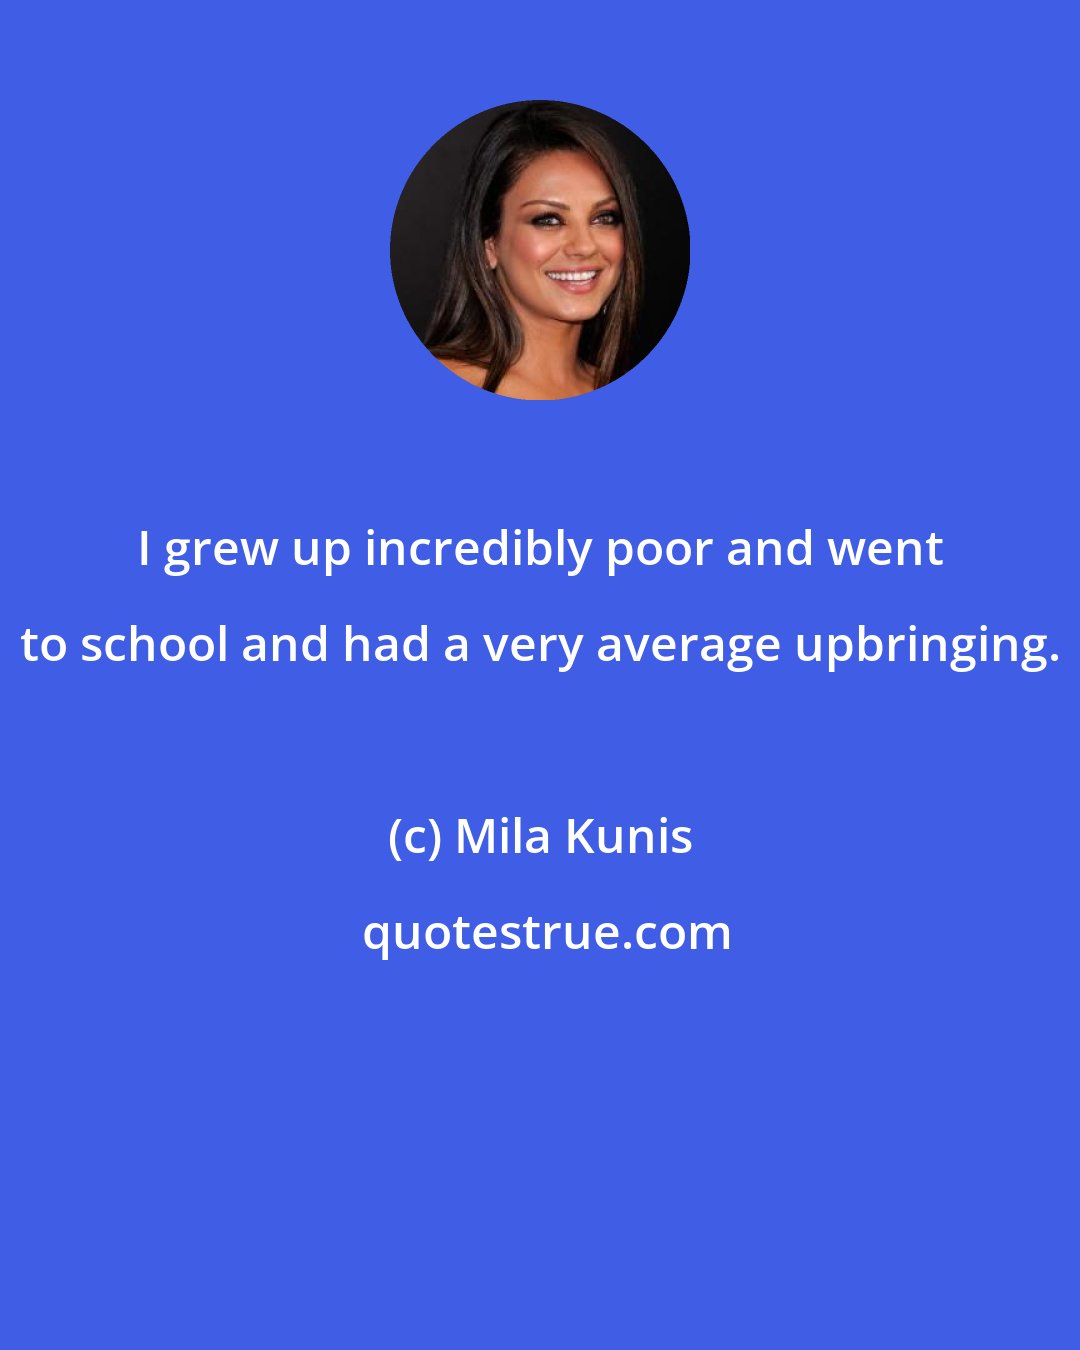 Mila Kunis: I grew up incredibly poor and went to school and had a very average upbringing.